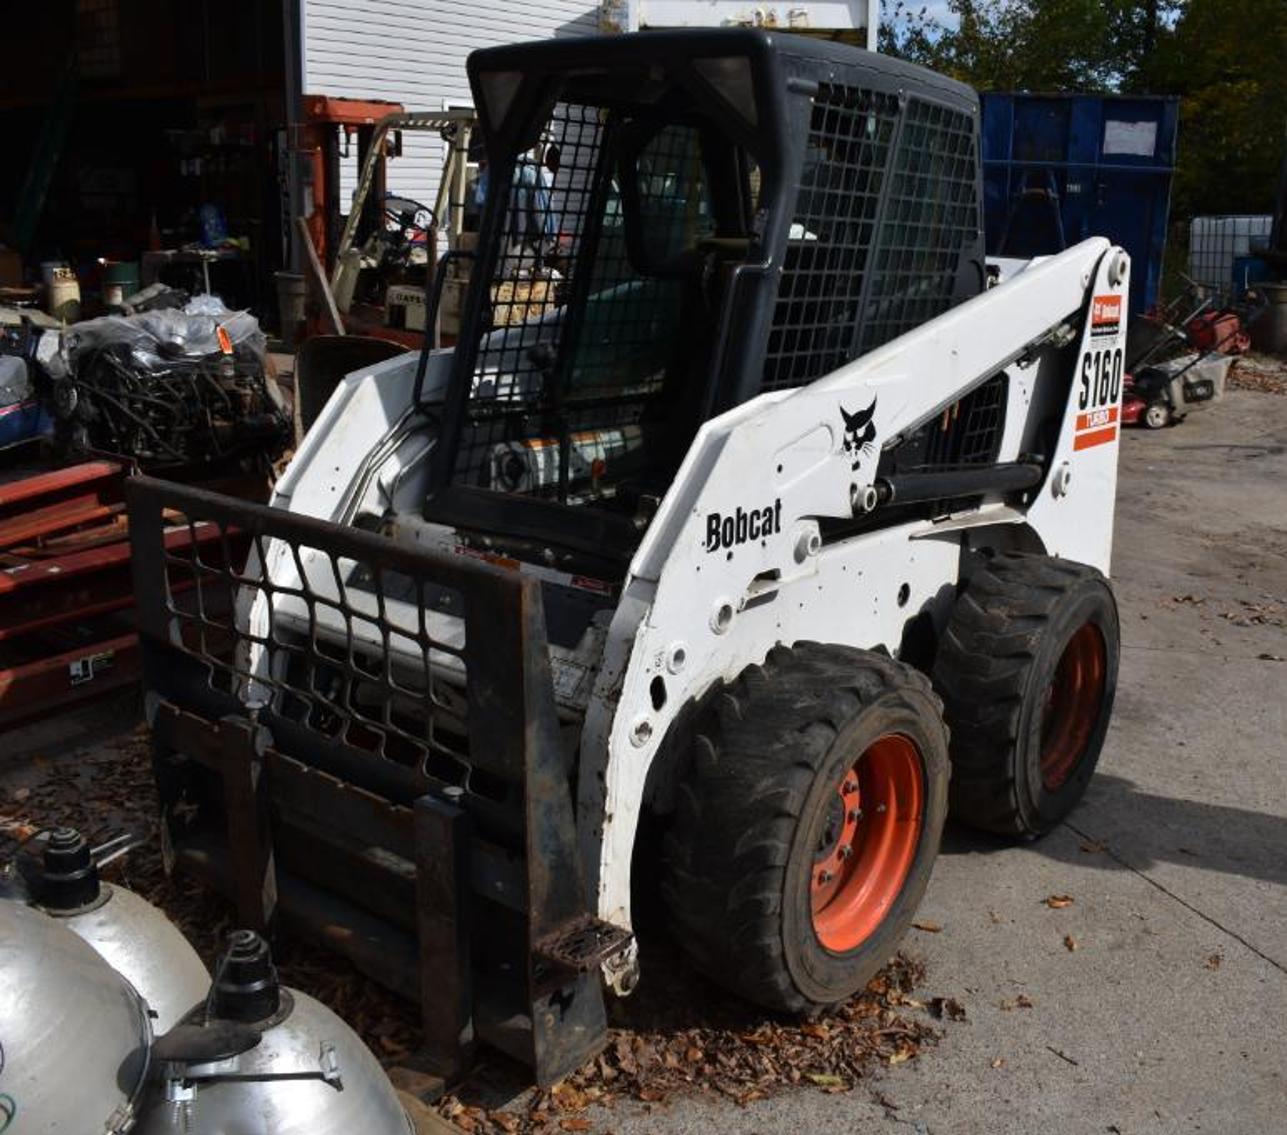 Bobcat S160 Turbo Skid Steer, Recreational Vehicles, Lawn and Garden, Shop Supplies & More